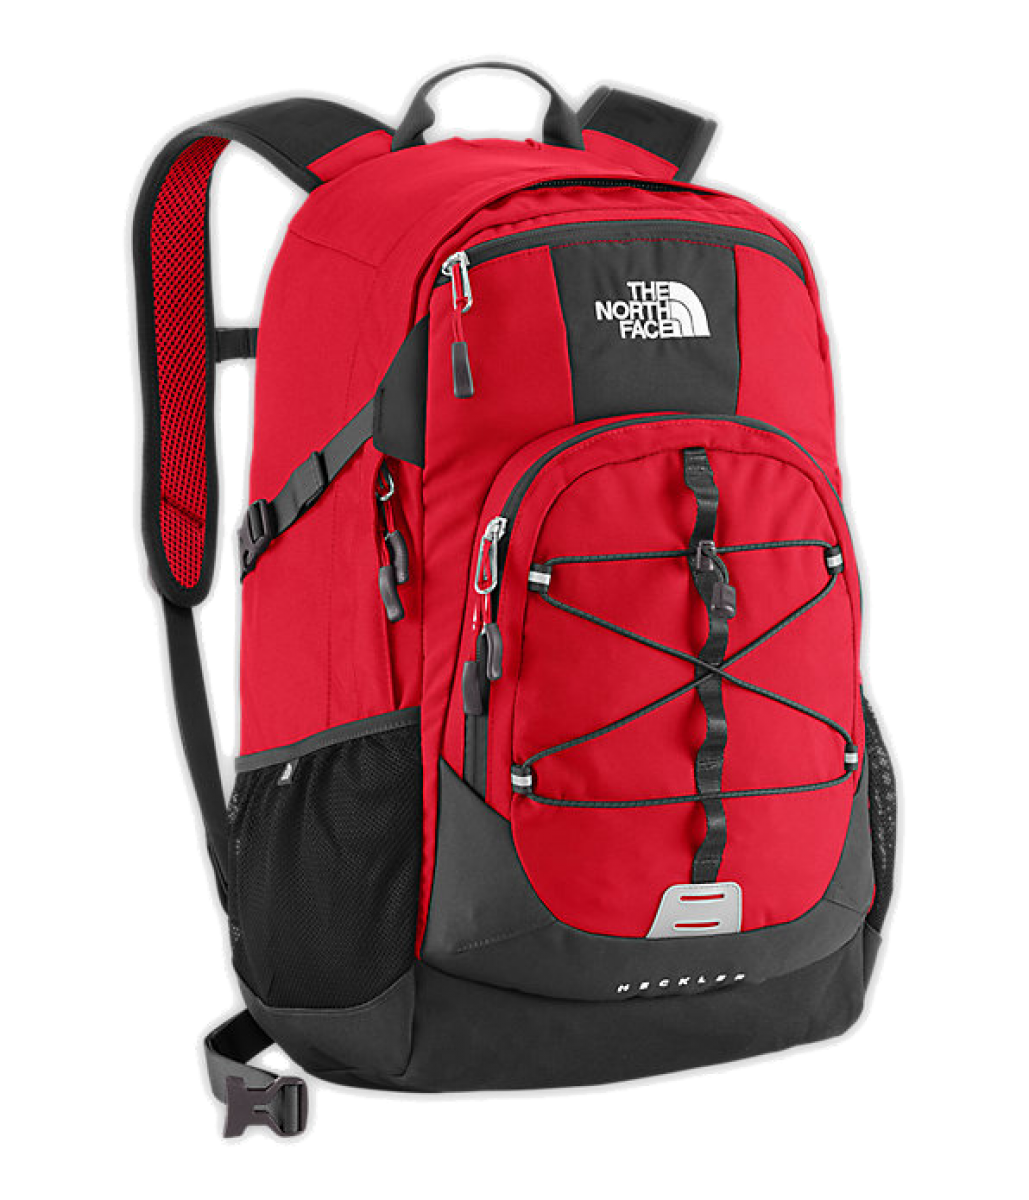 Backpack PNG Photos